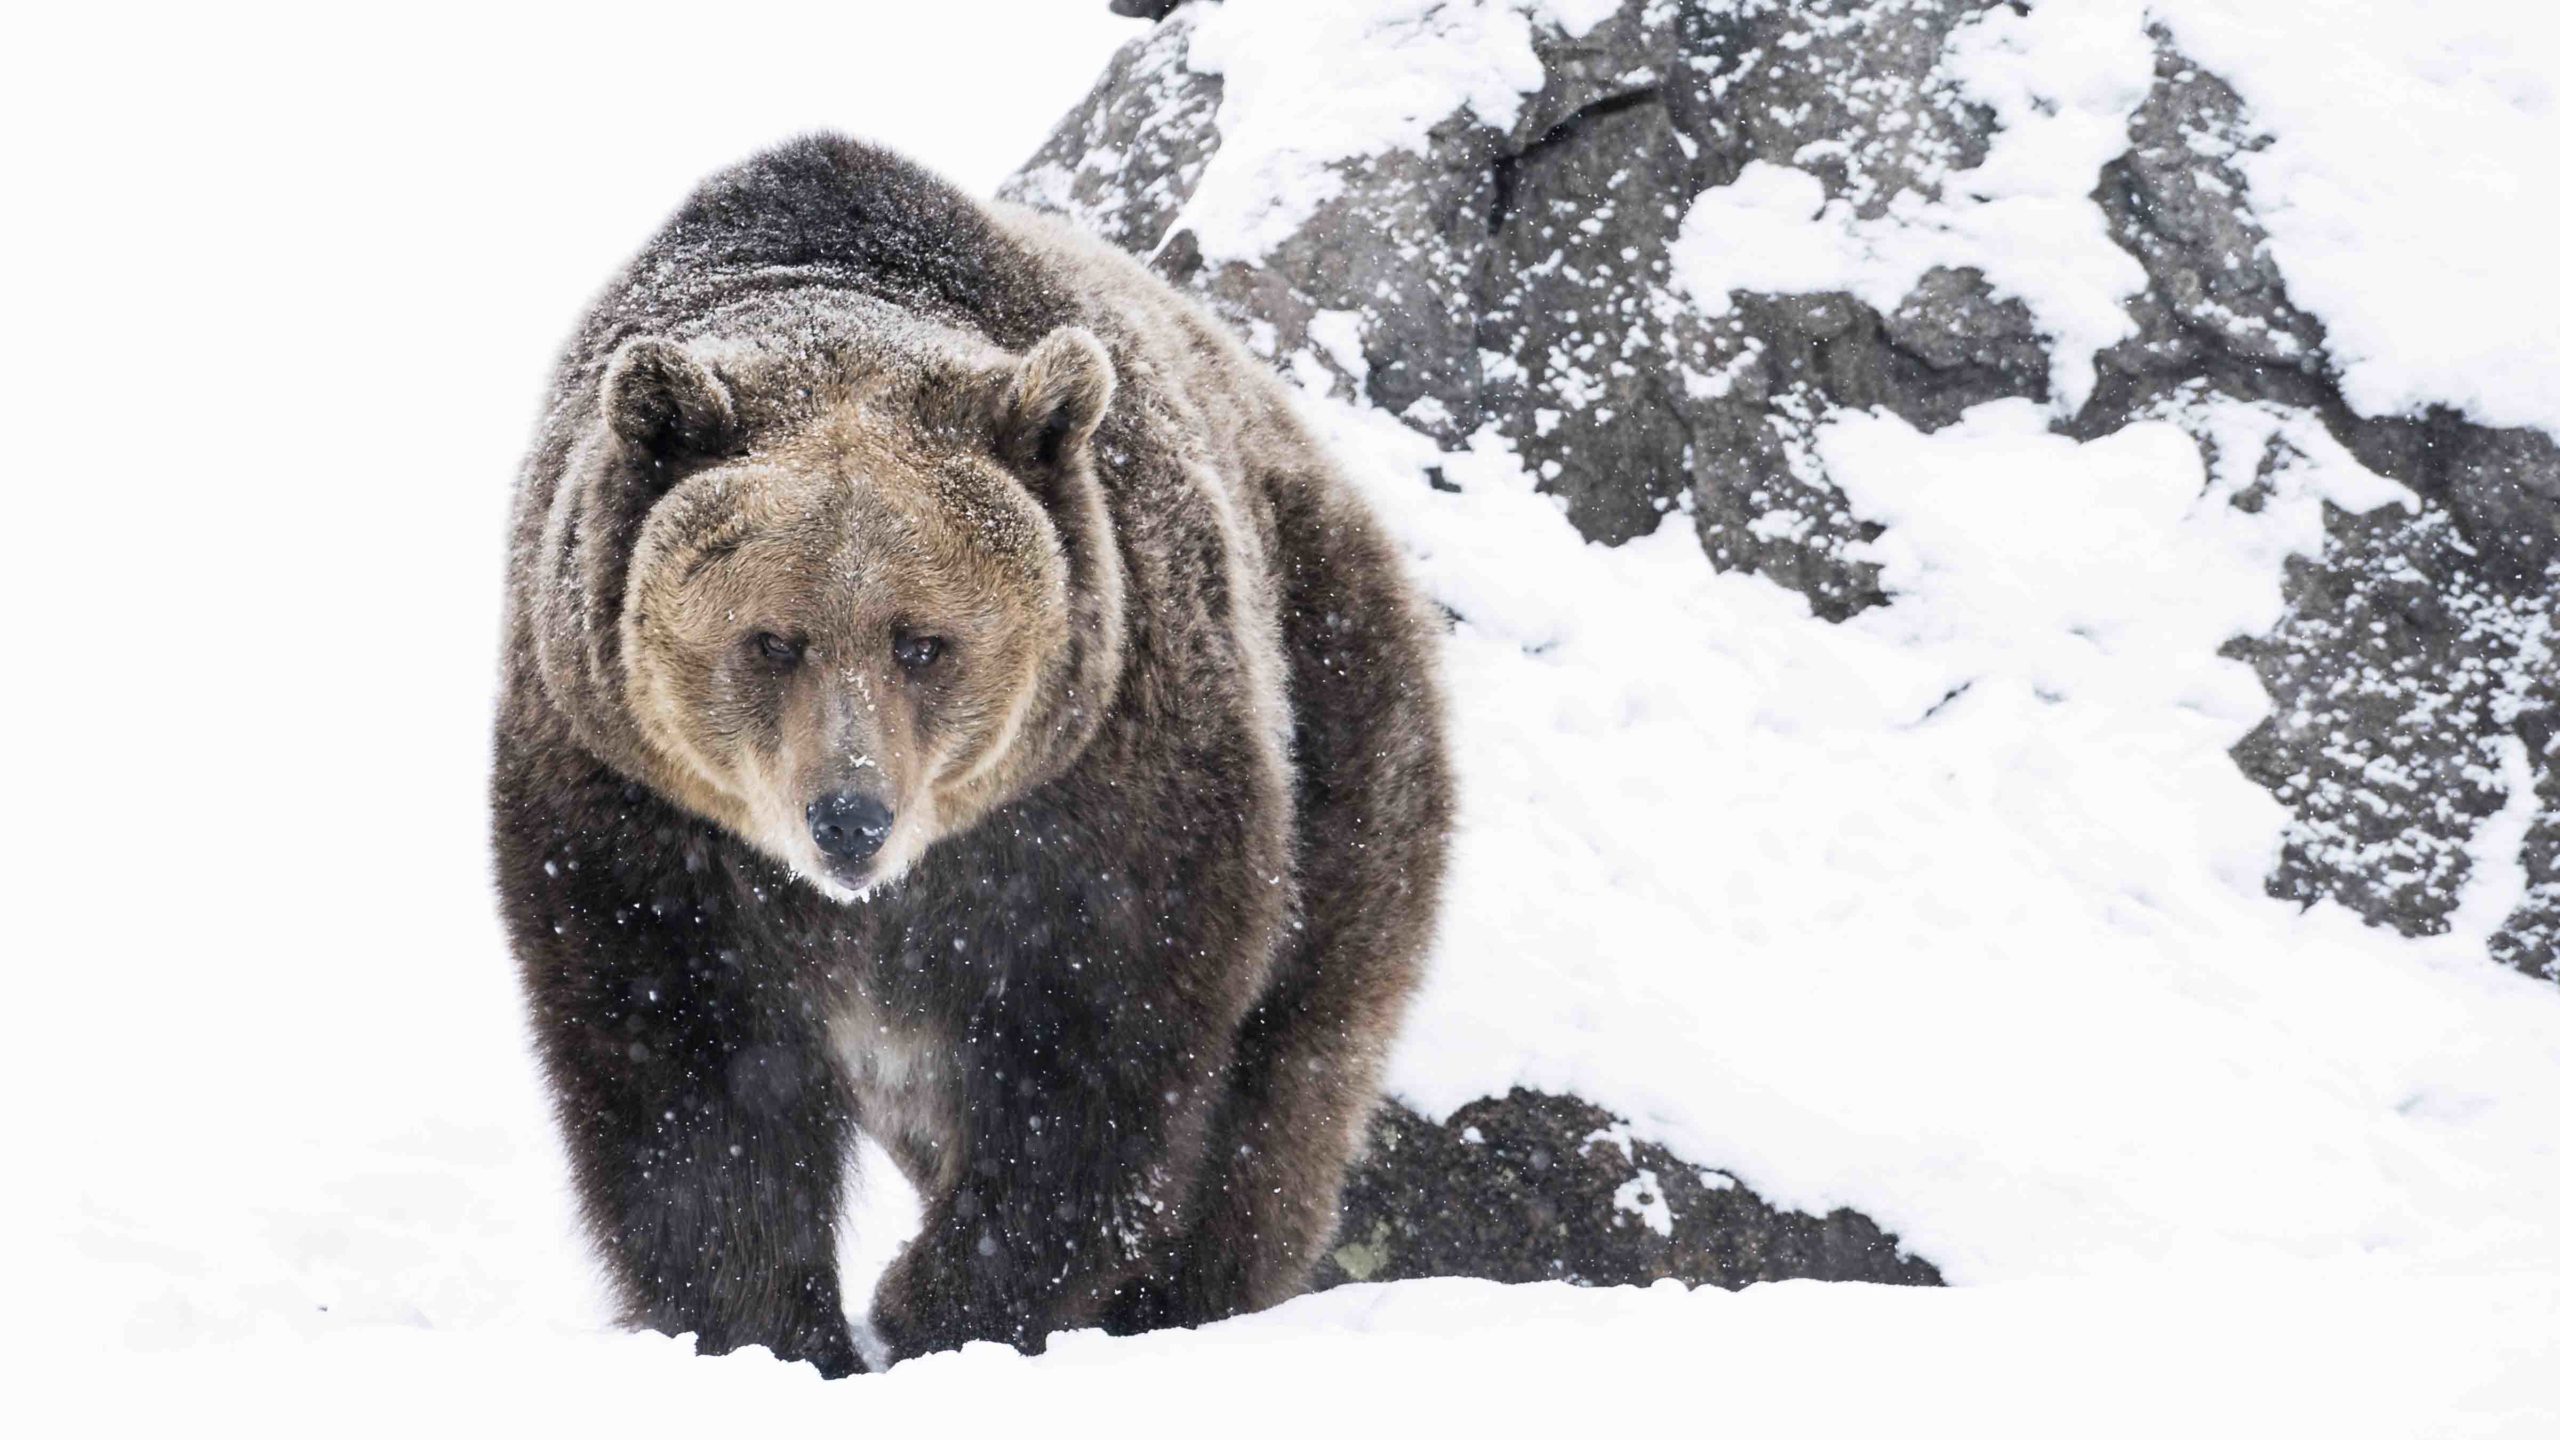 Three Grizzly Bears Tested Positive for Avian Flu in Montana